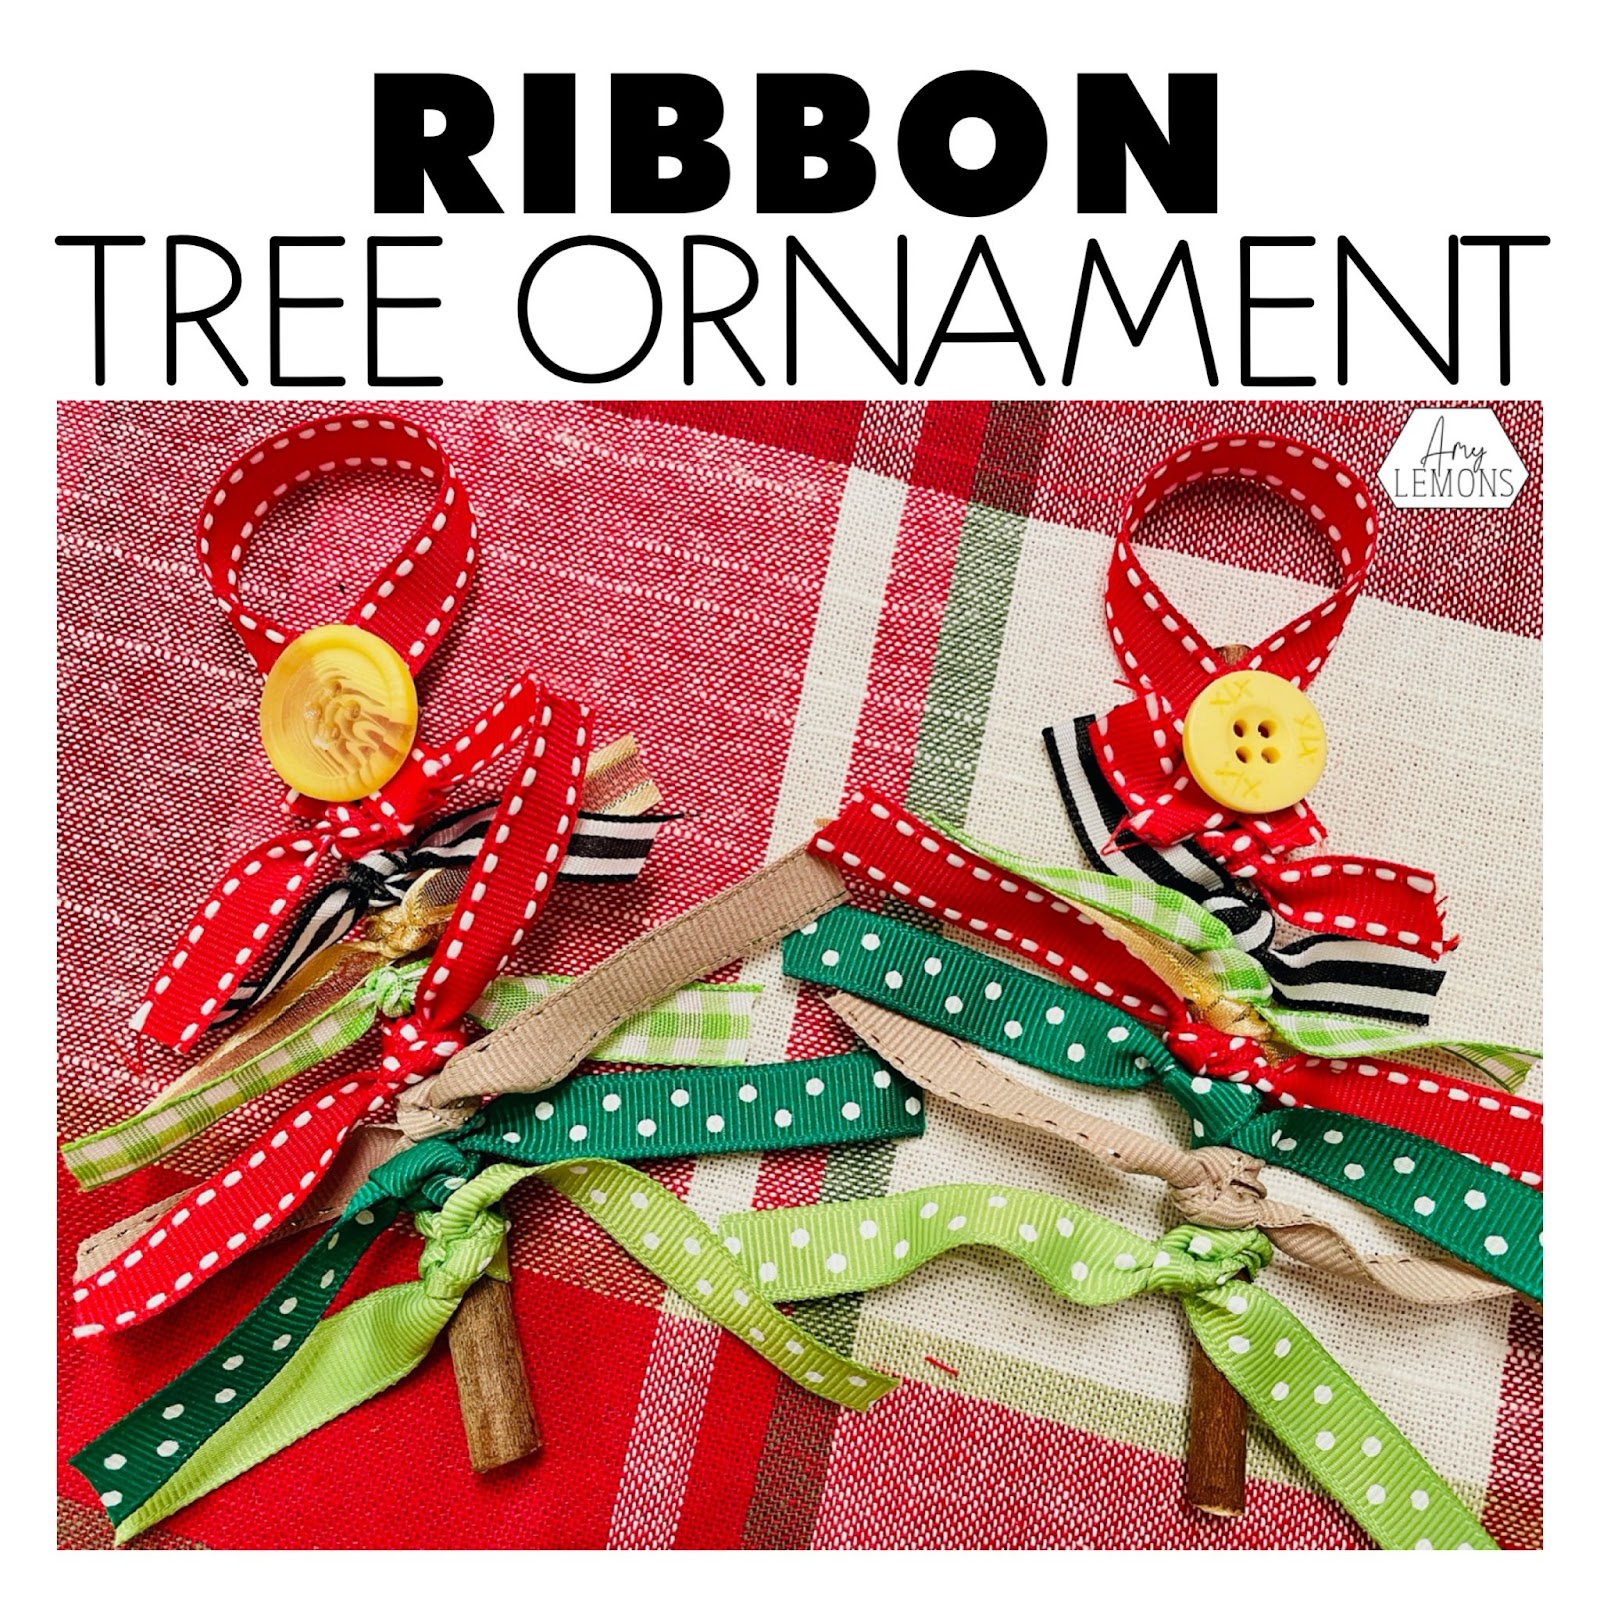 Christmas tree ornament made of multiple ribbons tied in a knot.